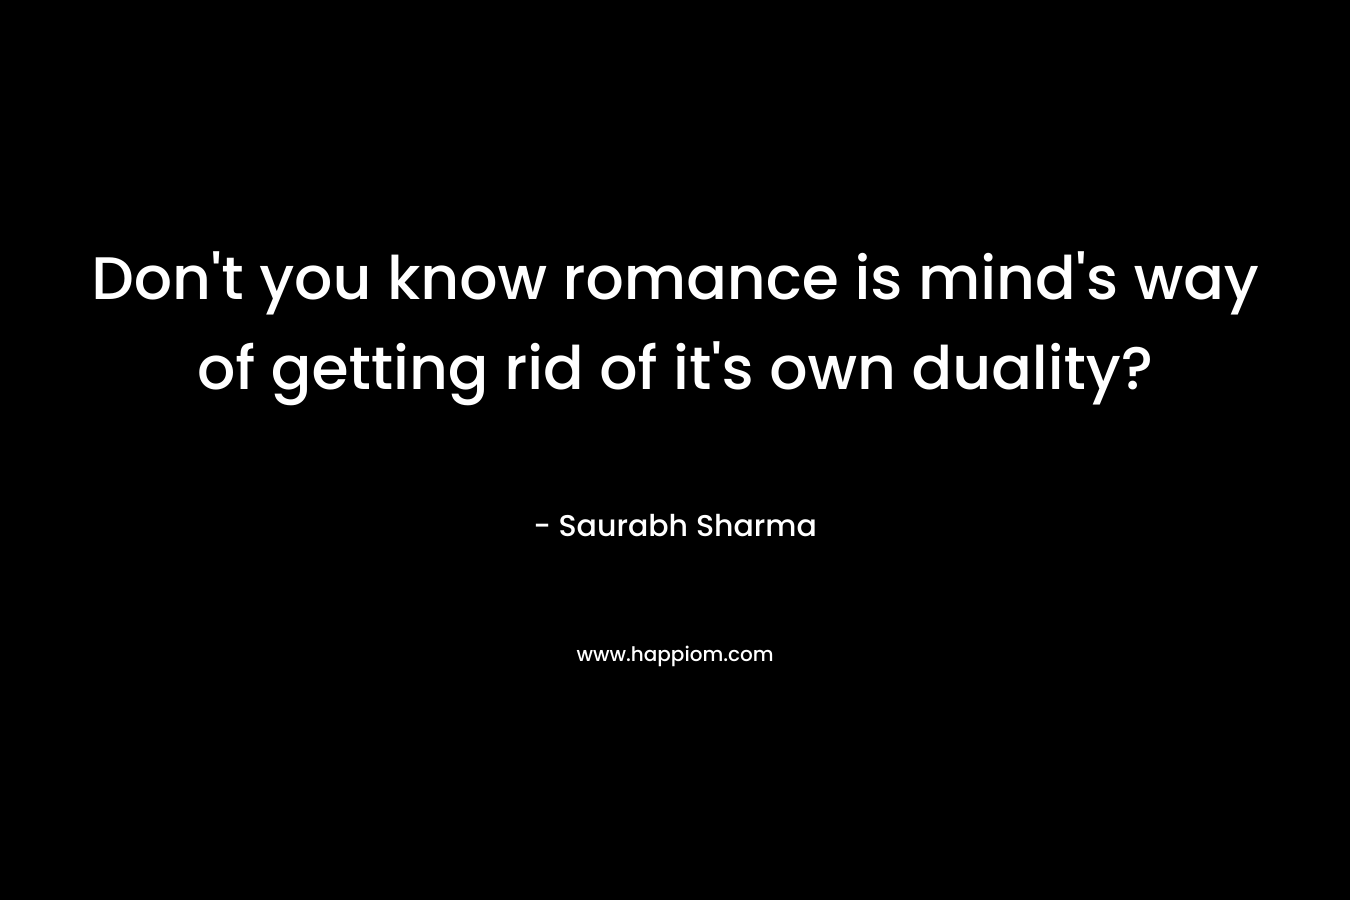 Don’t you know romance is mind’s way of getting rid of it’s own duality? – Saurabh Sharma